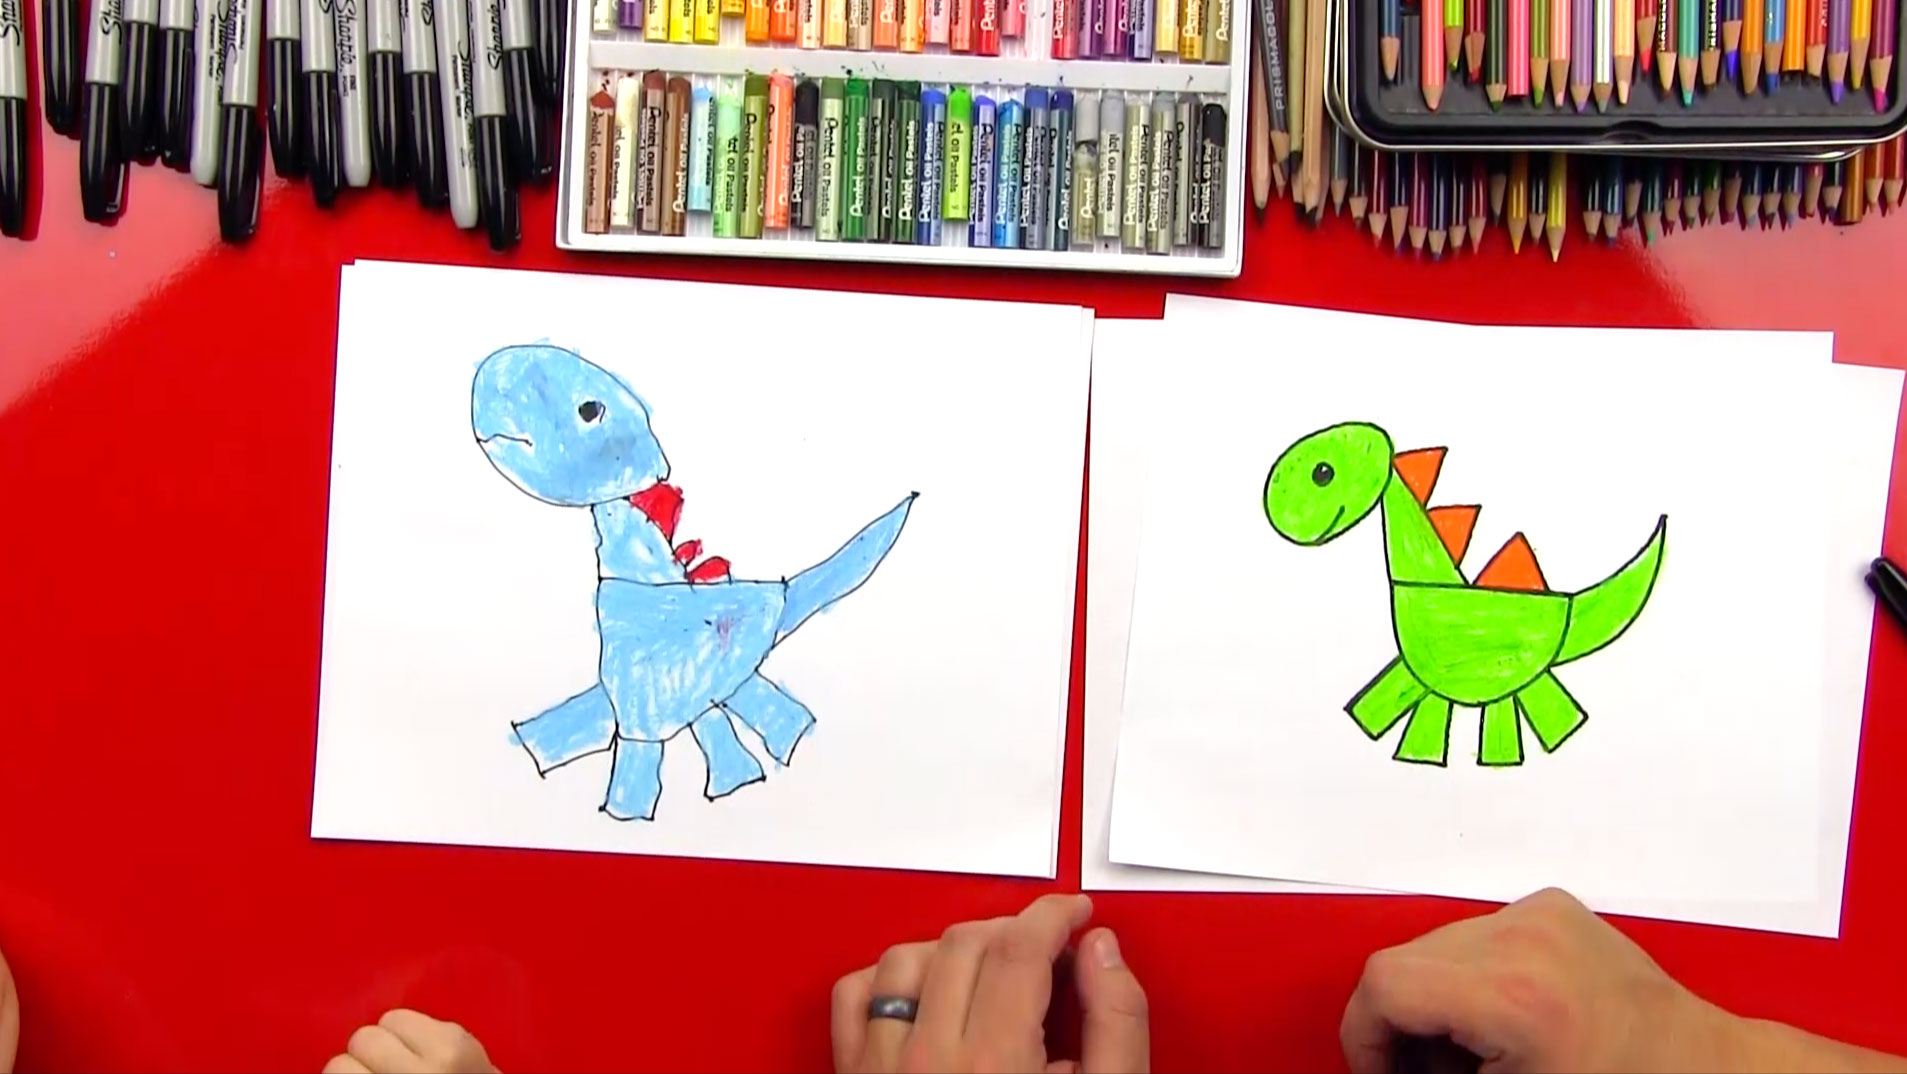 How To Draw A Dinosaur With Shapes - Art For Kids Hub